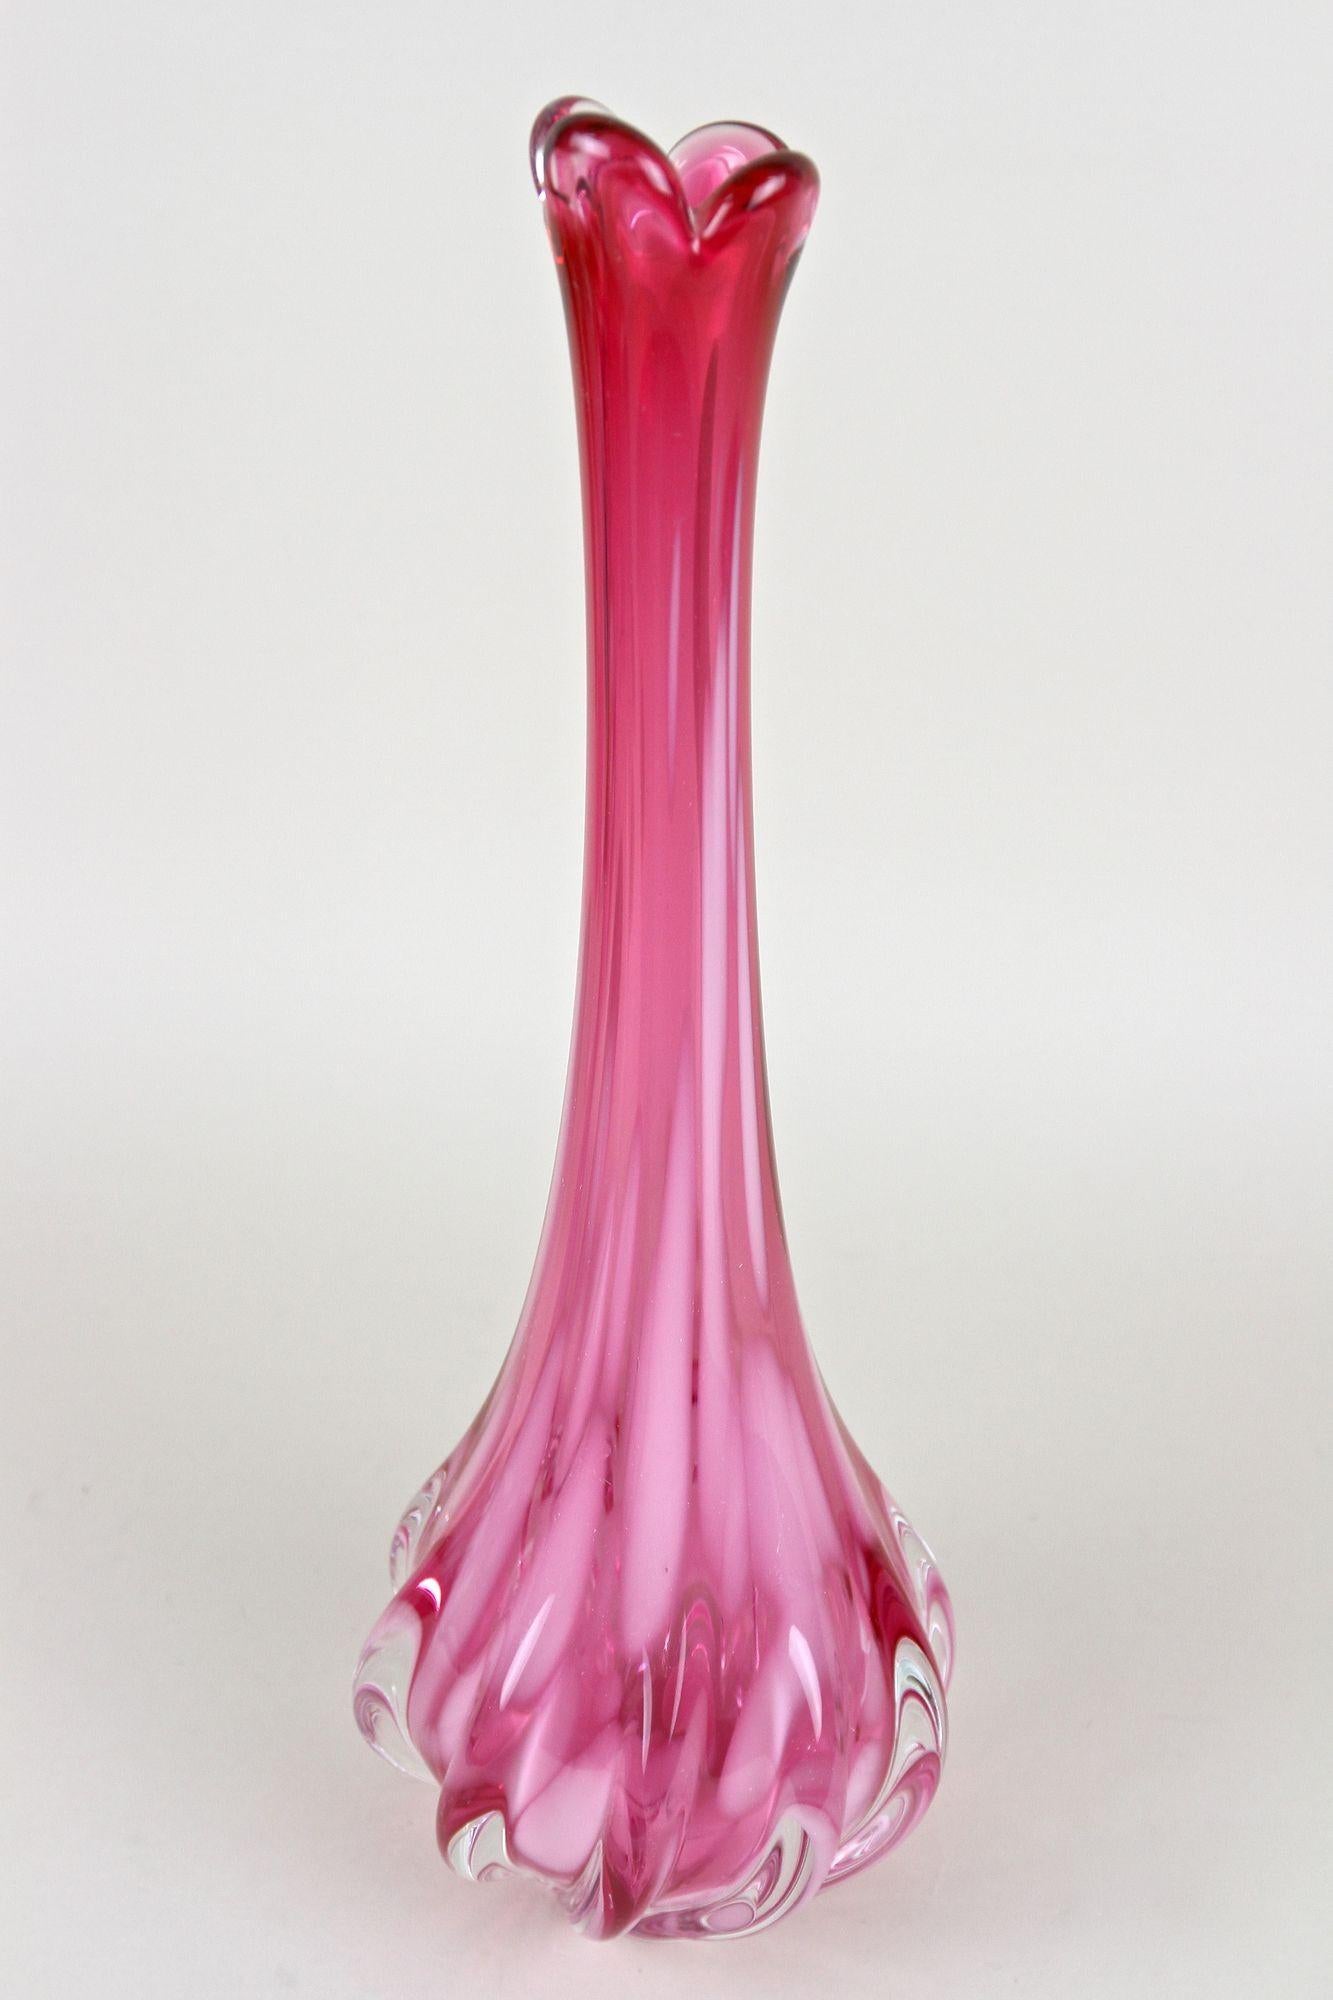 Pink Long Neck Murano Glass Vase, 20th Century, Italy circa 1970 For Sale 5